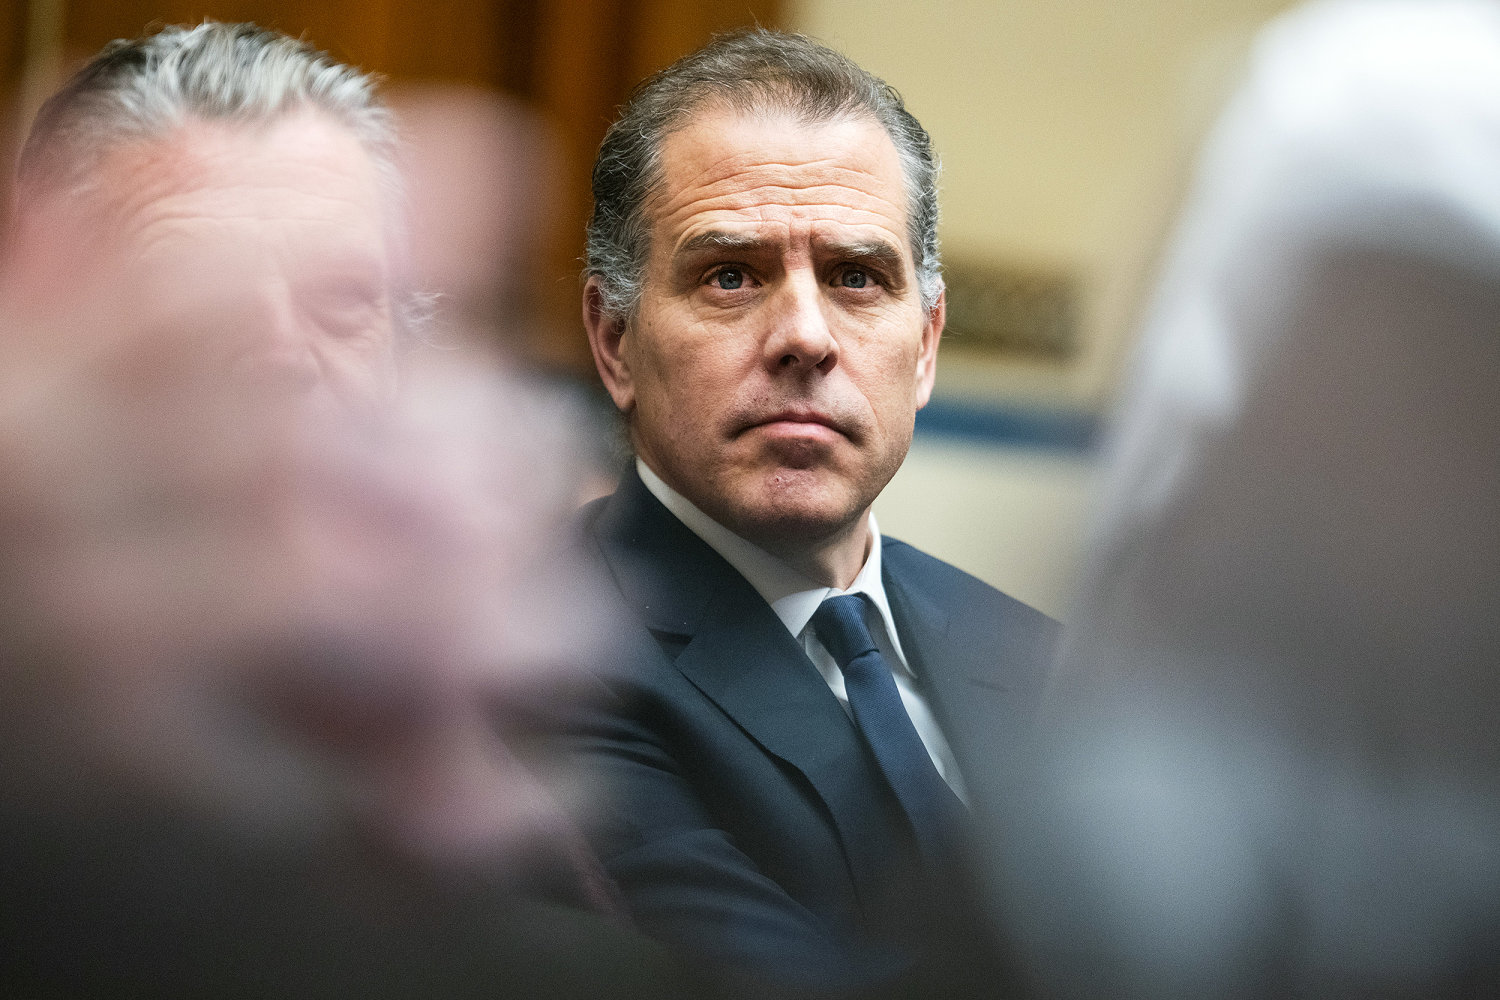 Former Secret Service agent sues New York Post and Daily Mail over Hunter Biden claim